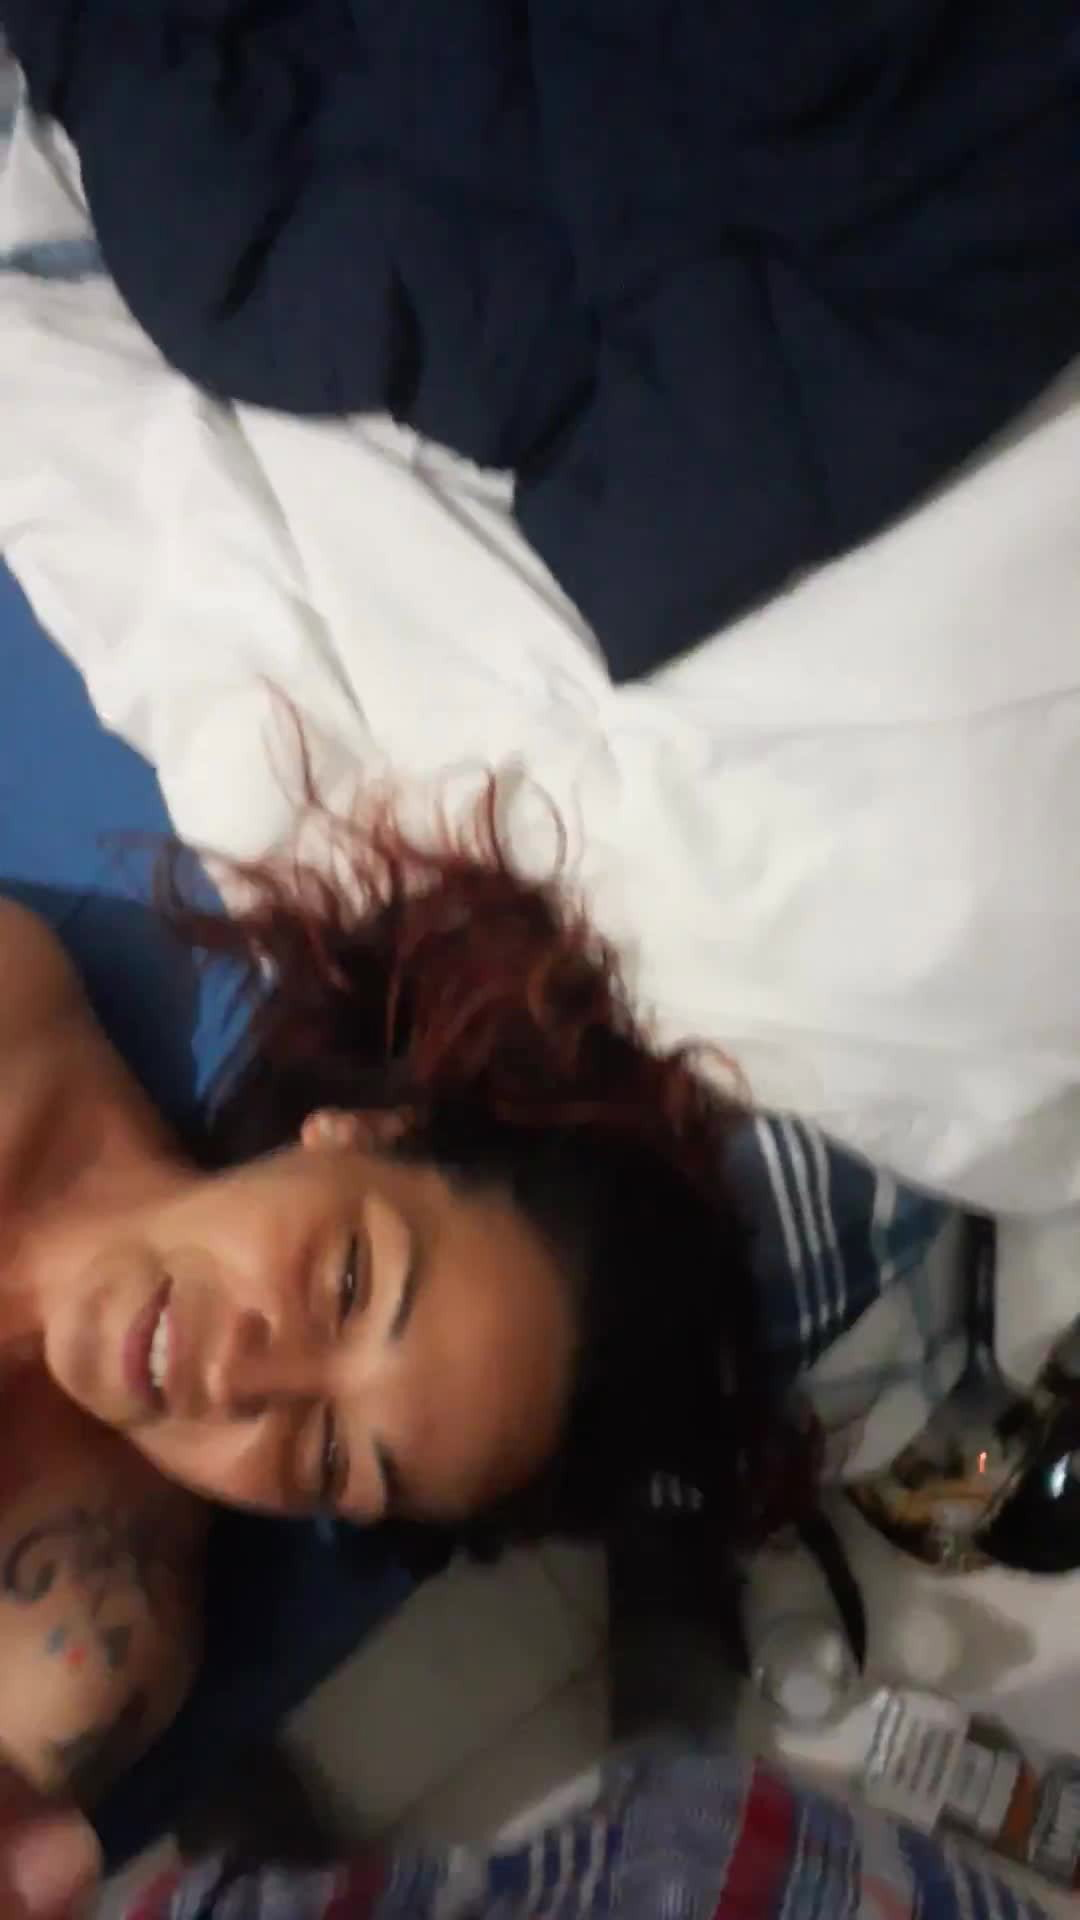 Watch the Video by Savagecouple with the username @Savagecouple, posted on February 12, 2022. The post is about the topic Cum all over. and the text says 'my baby momma came thru on a molly. she started talking dirty telling me about her boyfriend. so i nutted on her face and sent the video to her boyfriend.. she loved it'